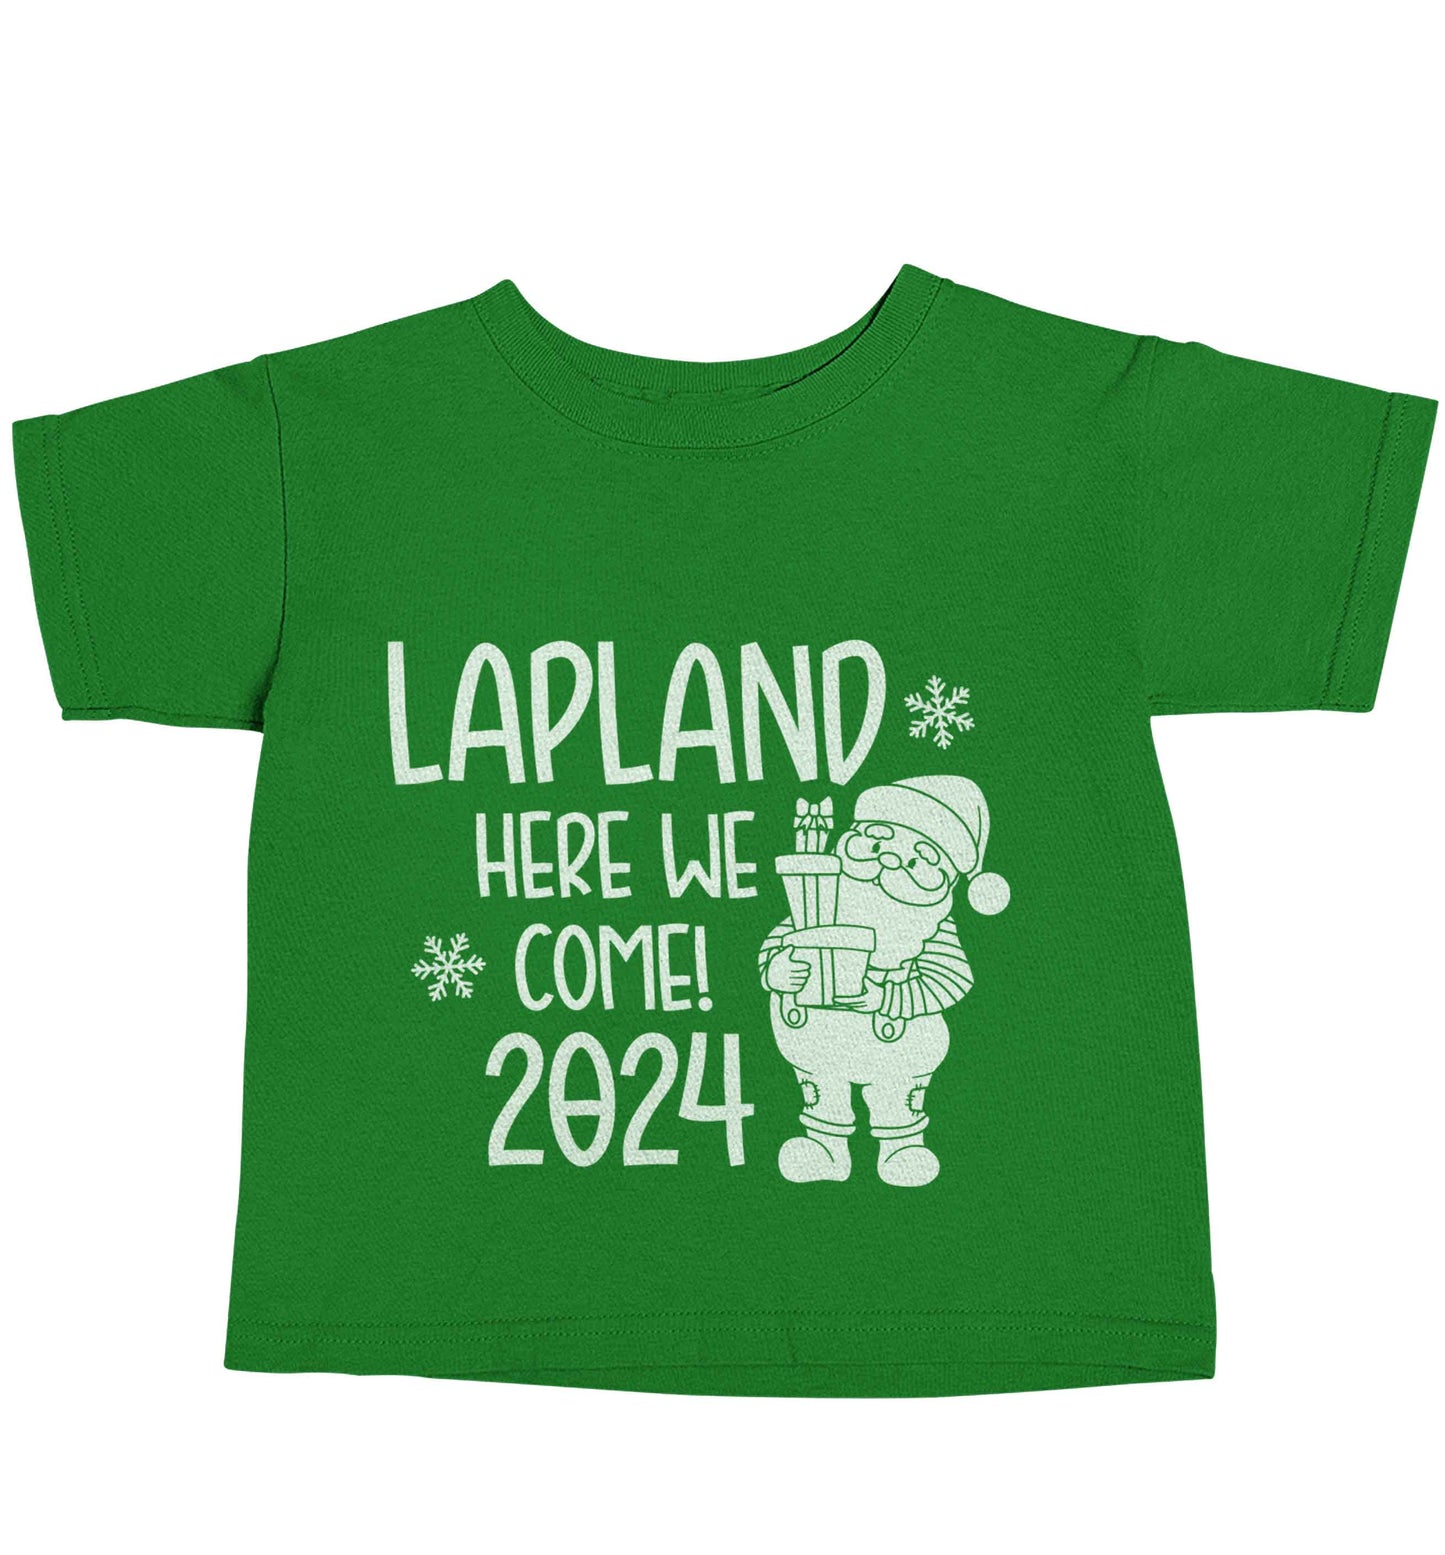 Lapland here we come green baby toddler Tshirt 2 Years